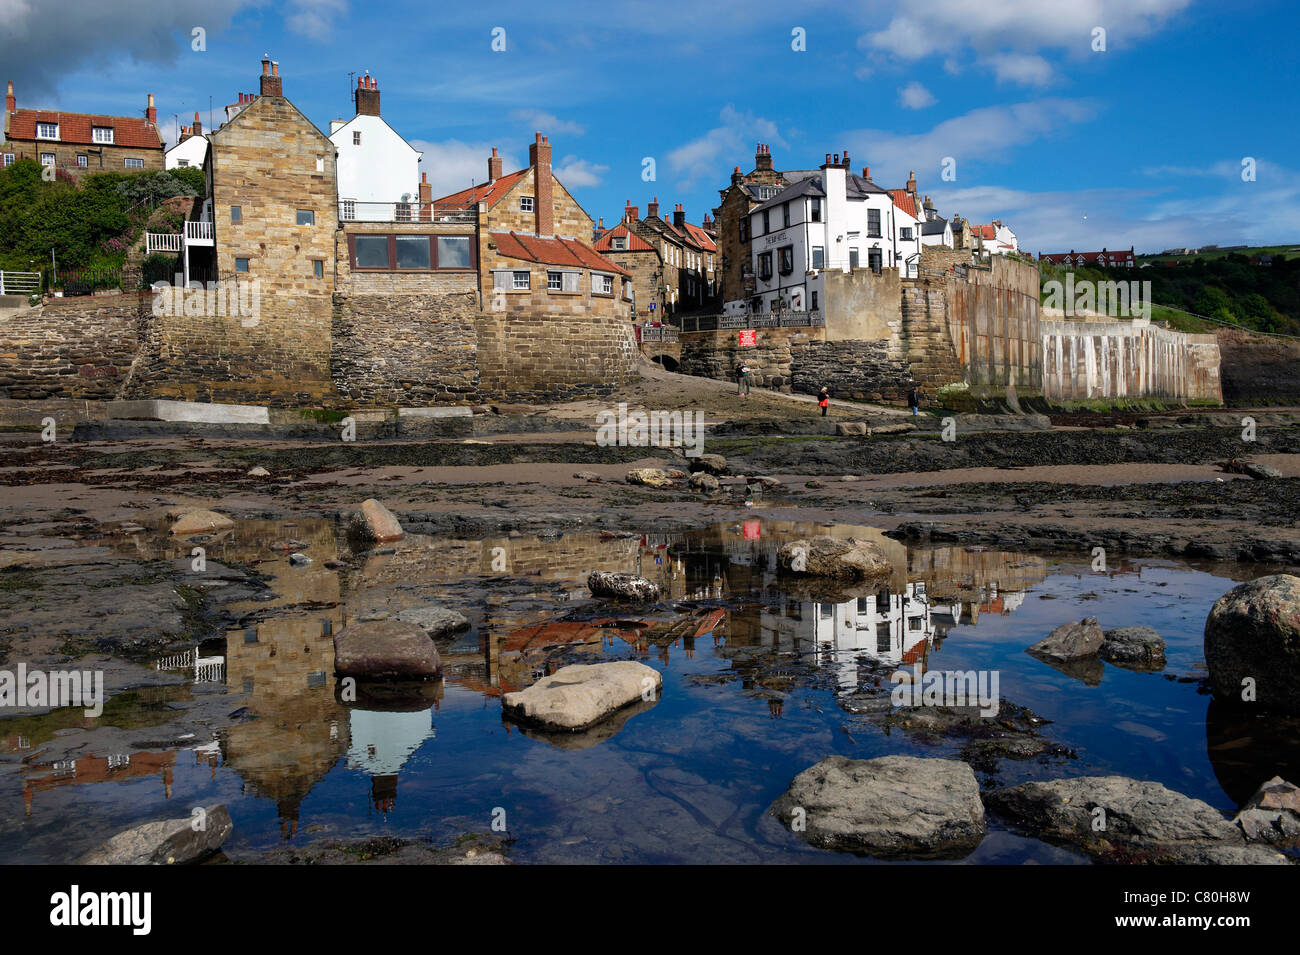 England, North Yorkshire, Robin's Hood Bay, the town Stock Photo